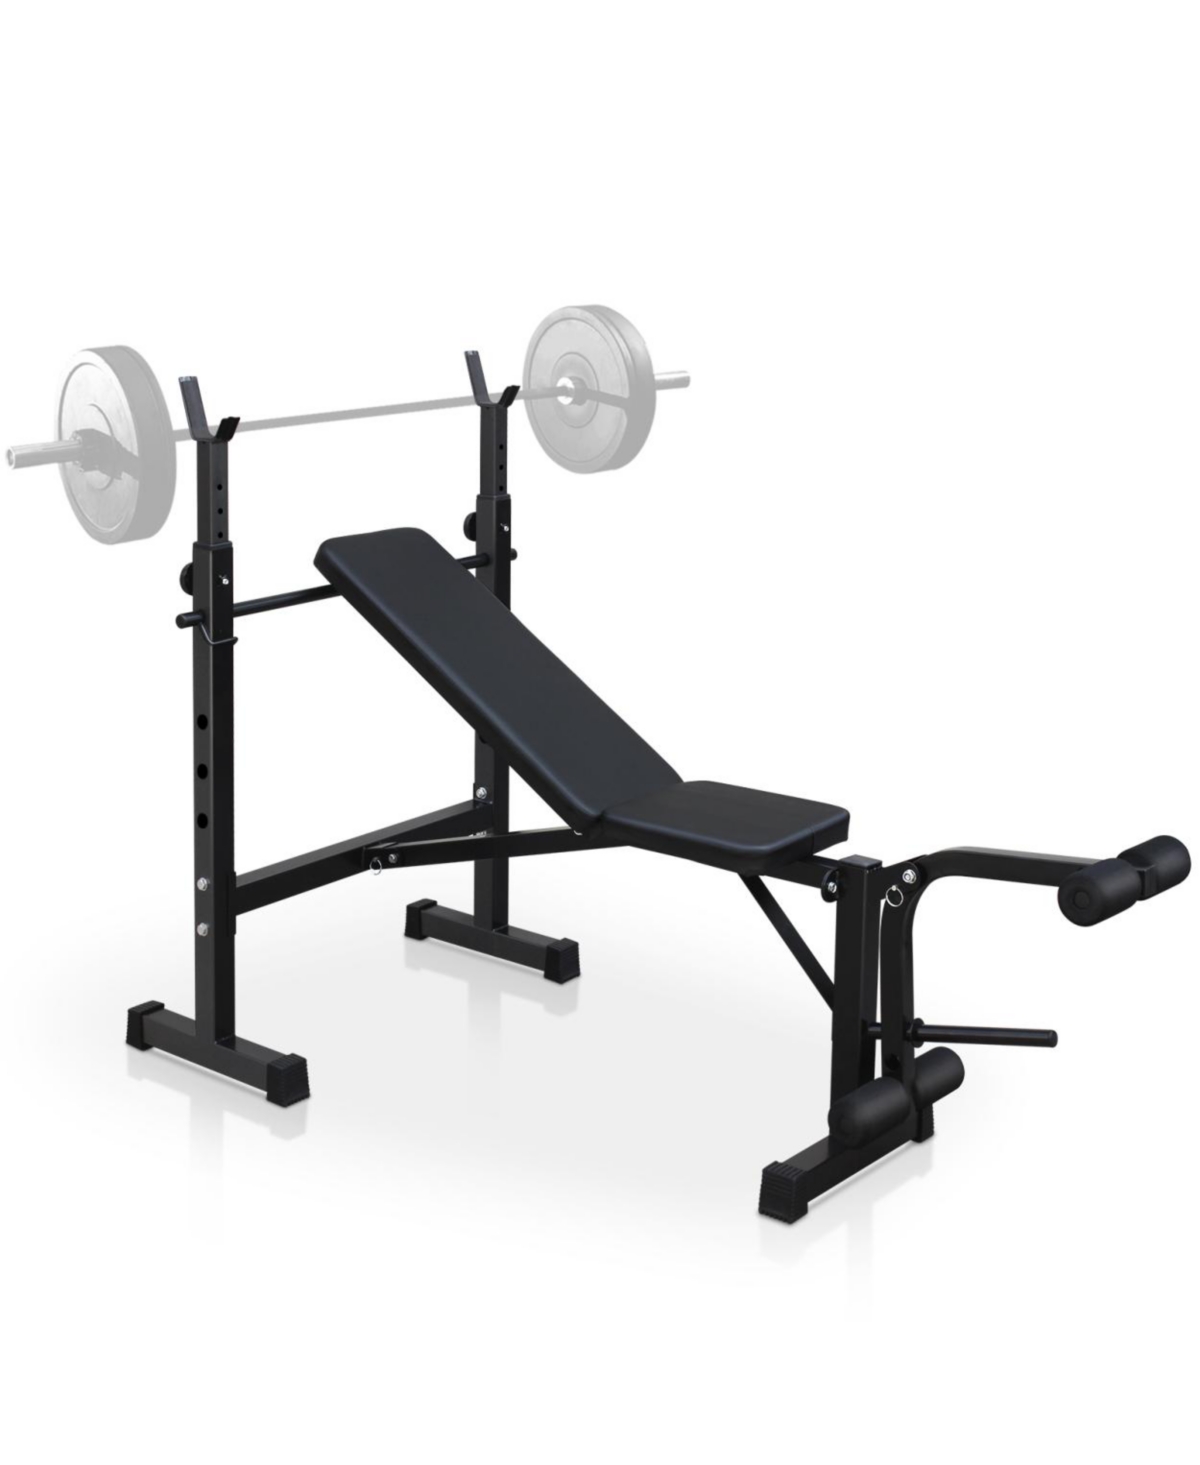 Olympic Weight Bench, Bench Press Set With Squat Rack And Bench For Home Gym Full-Body Workout - Black